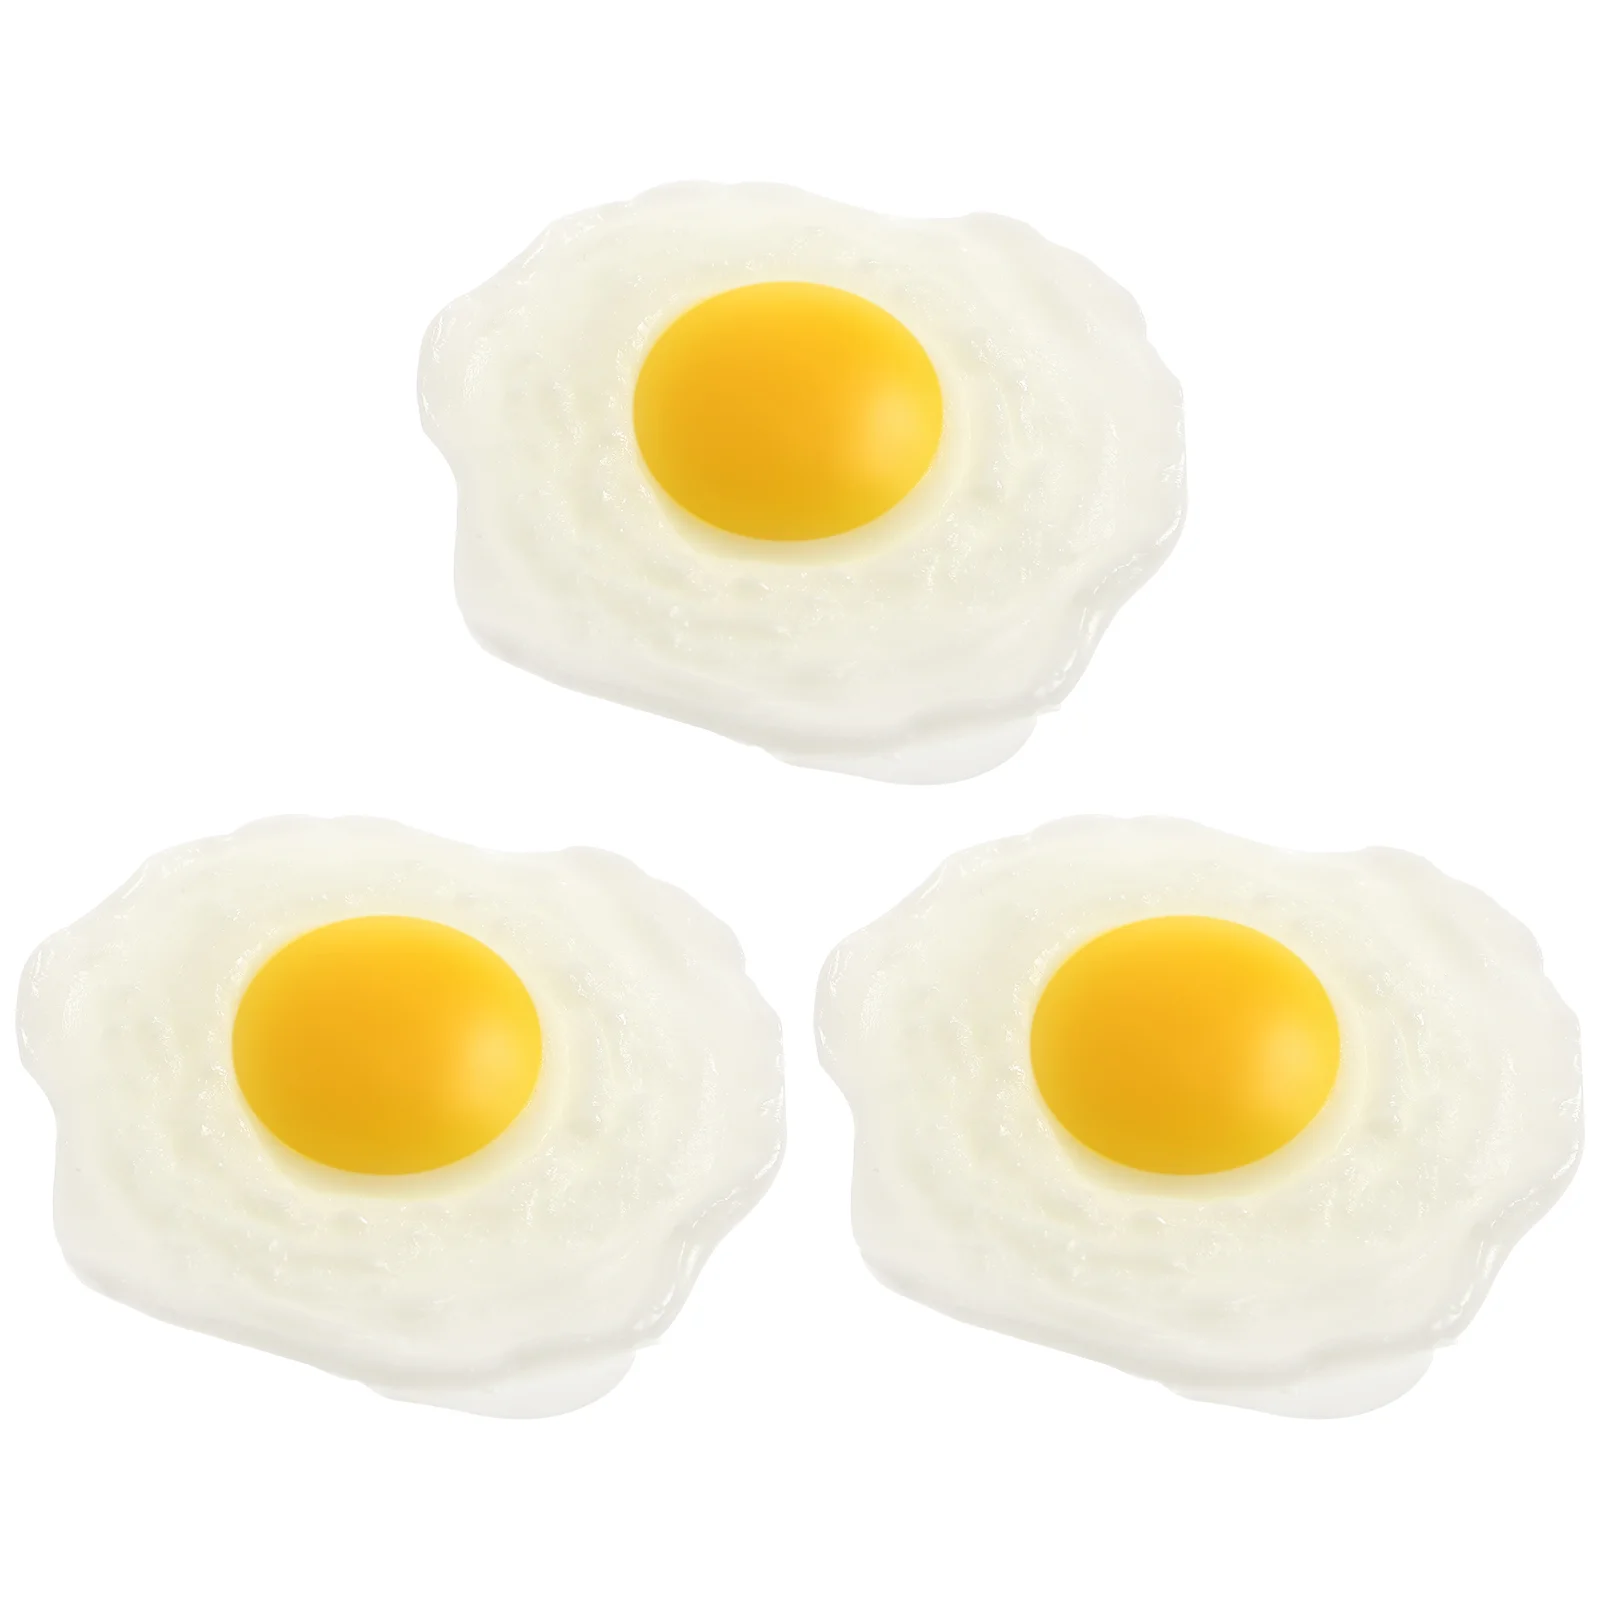 

Egg Fried Fake Eggs Toy Artificial Toys Squeeze Play Realistic Props Rubber Poached Prank Simulation Decompression Set Kids